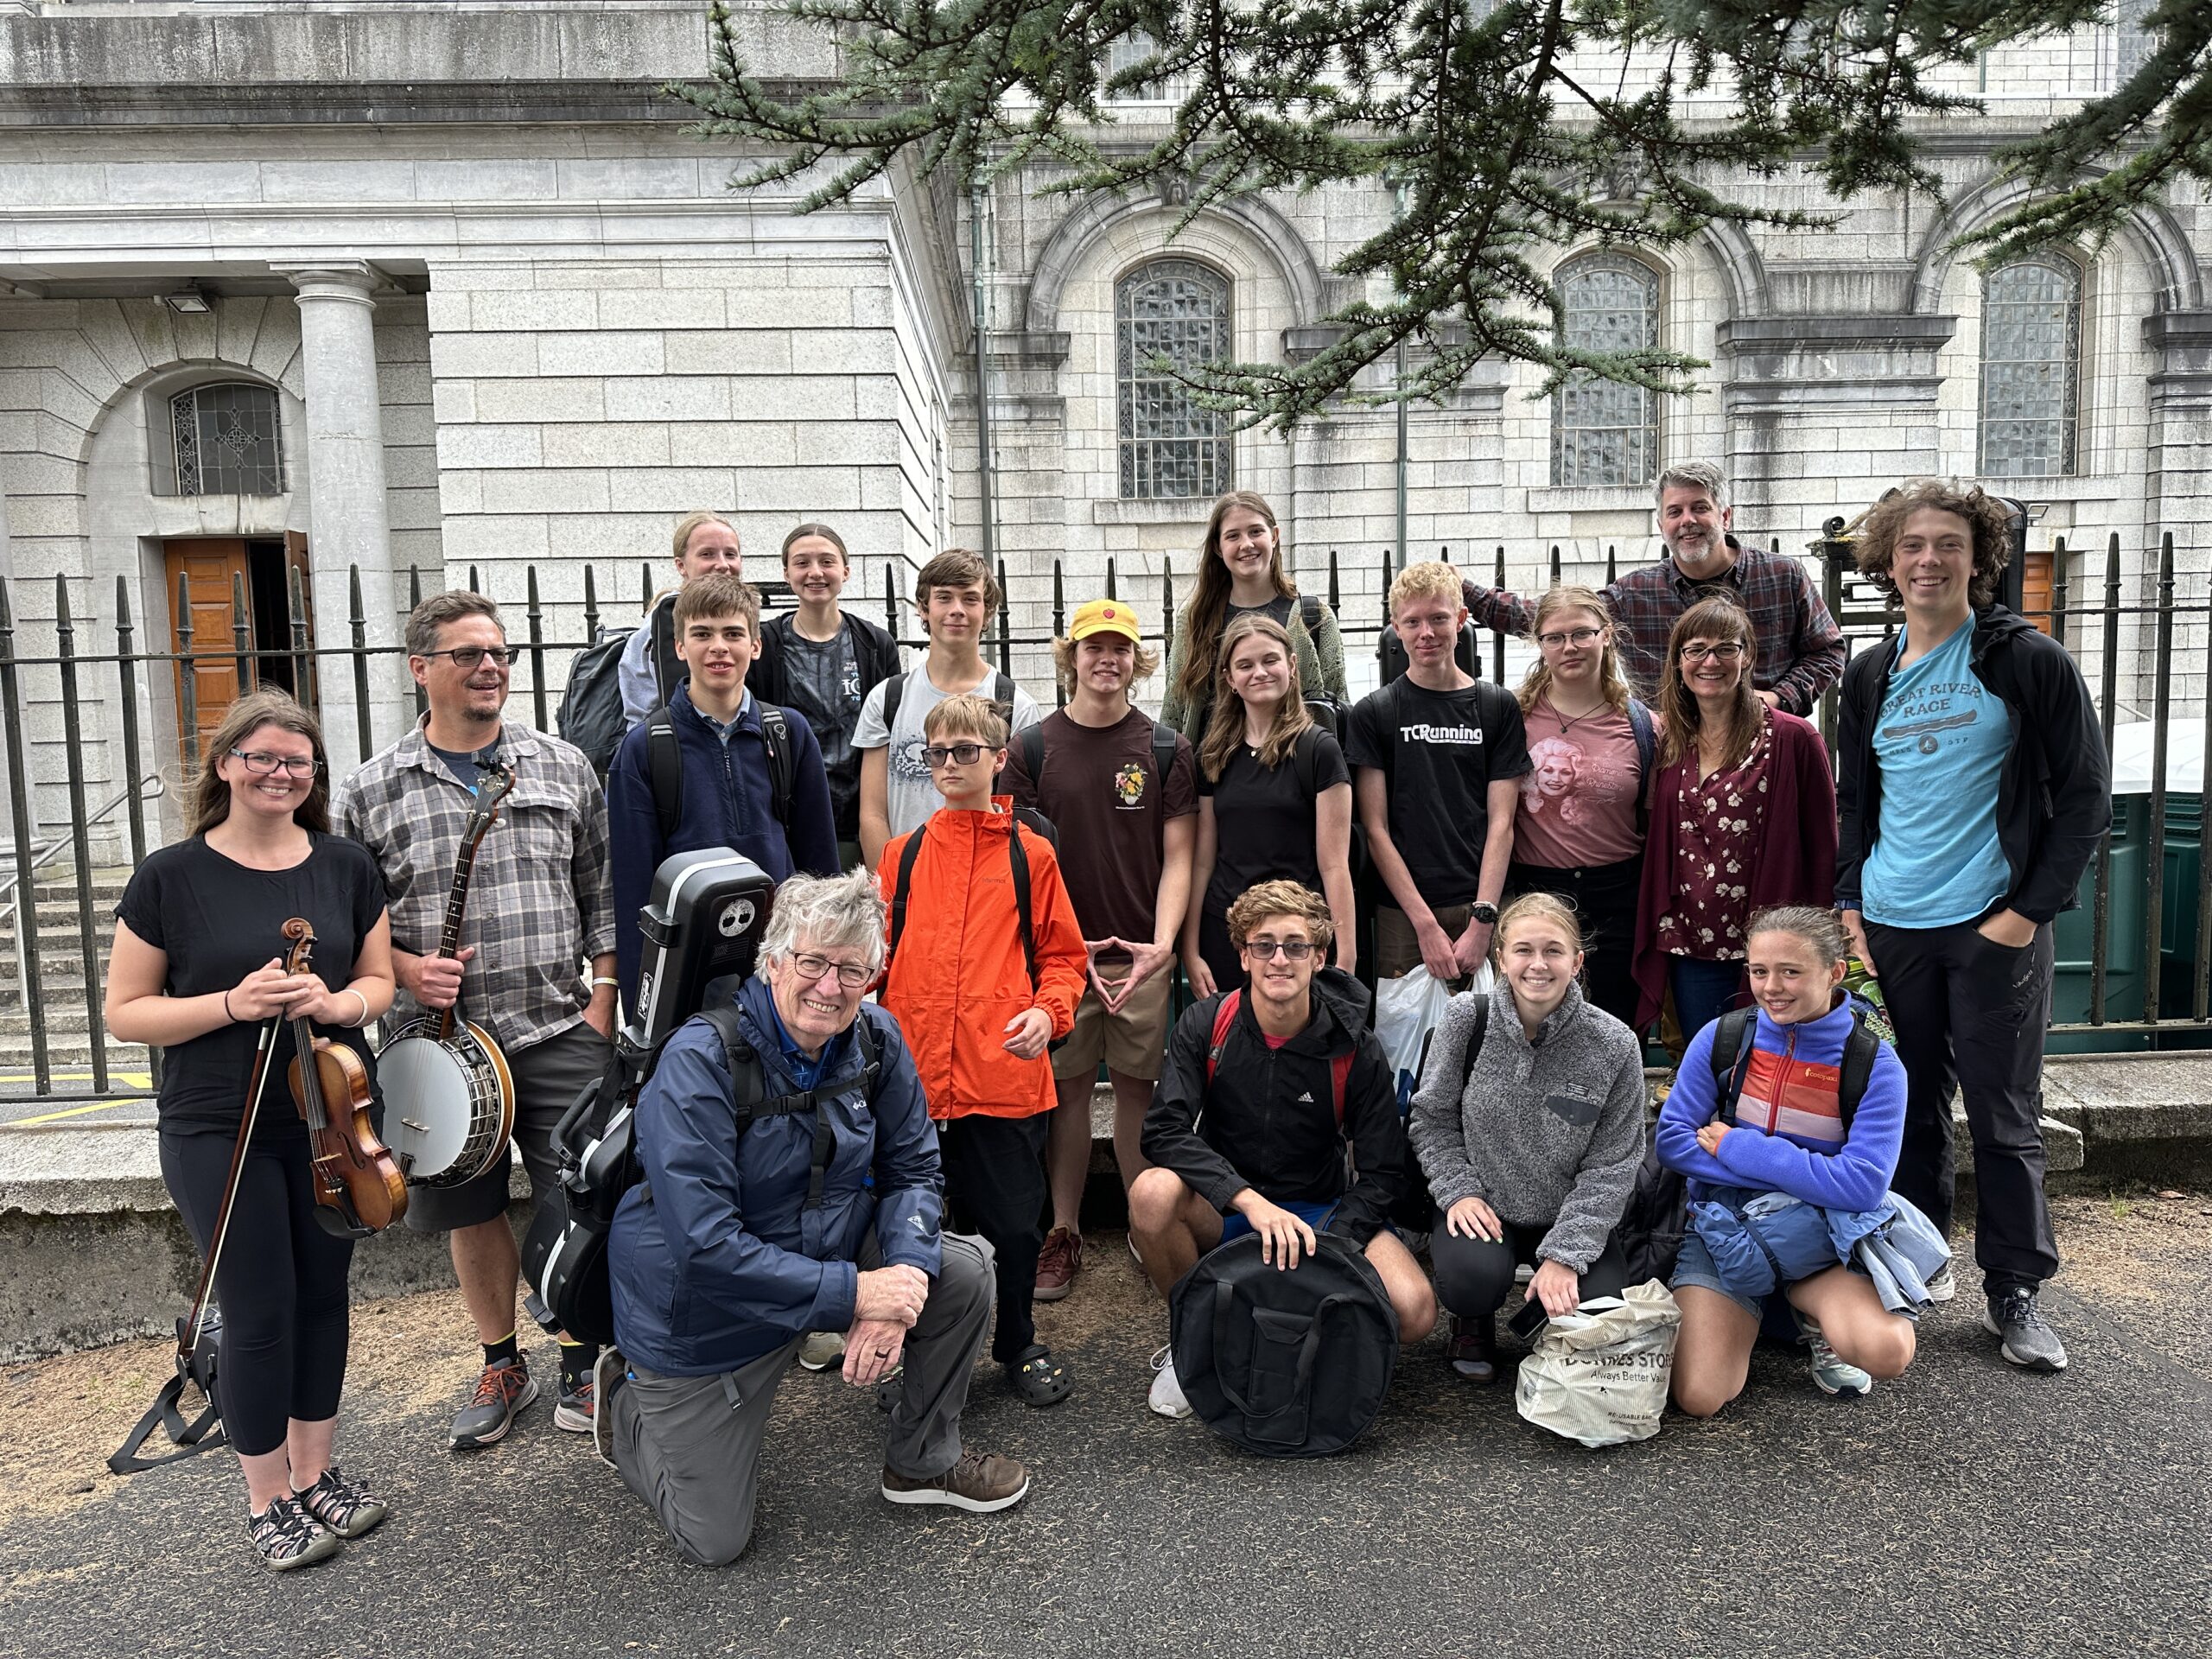 From Monday to Thursday, students gathered at tree each day after their Scoil Éigse workshops. Youth students were given a scholarship from the Frank Pasquerella Memorial Fund to attend these workshops.